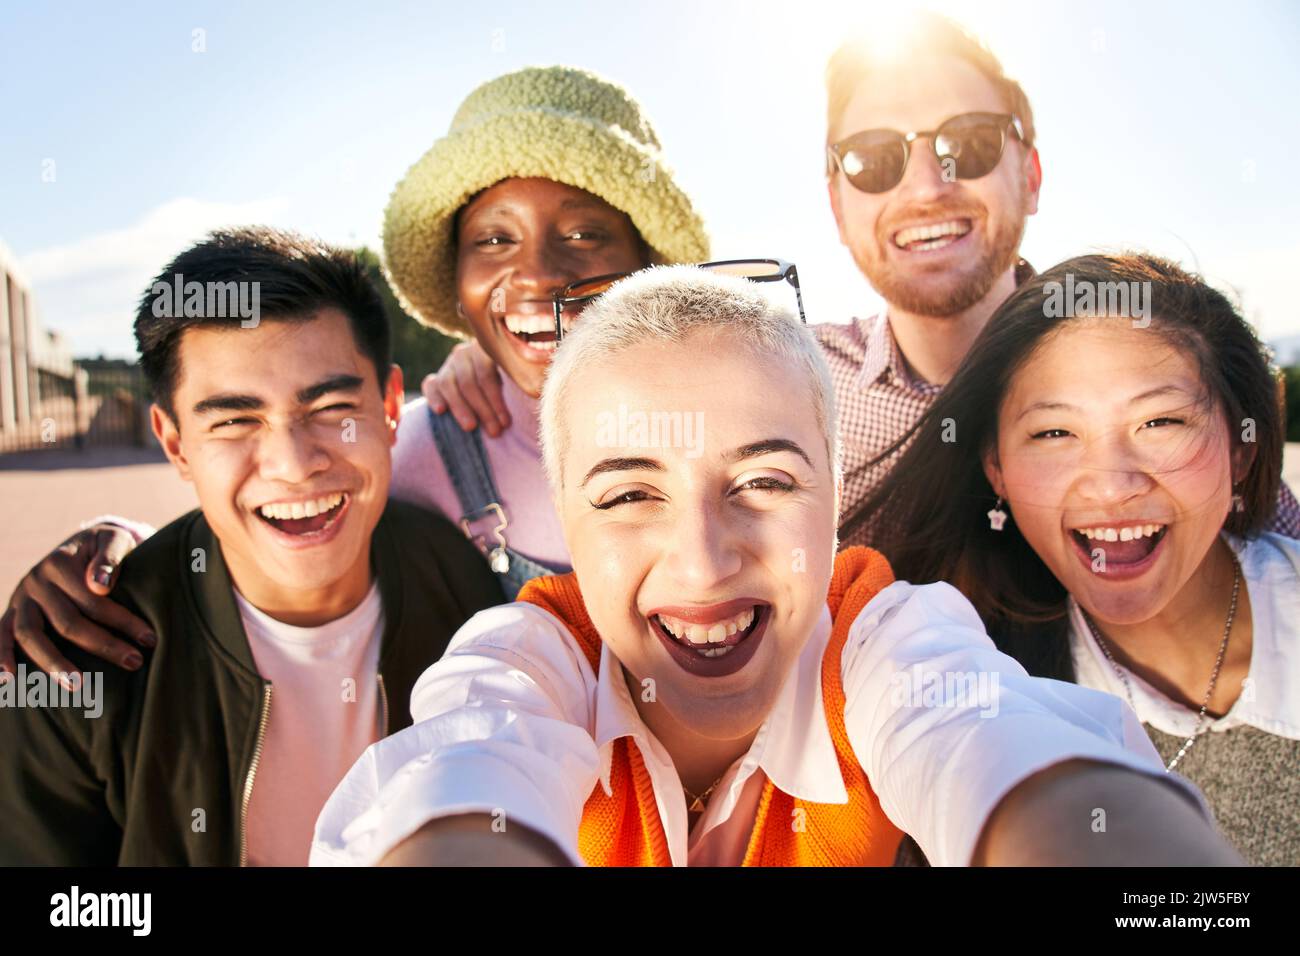 Smiling selfie of cheerful group of young people. Happy friends video call excited having fun. Interracial boys and girls taking picture looking at Stock Photo